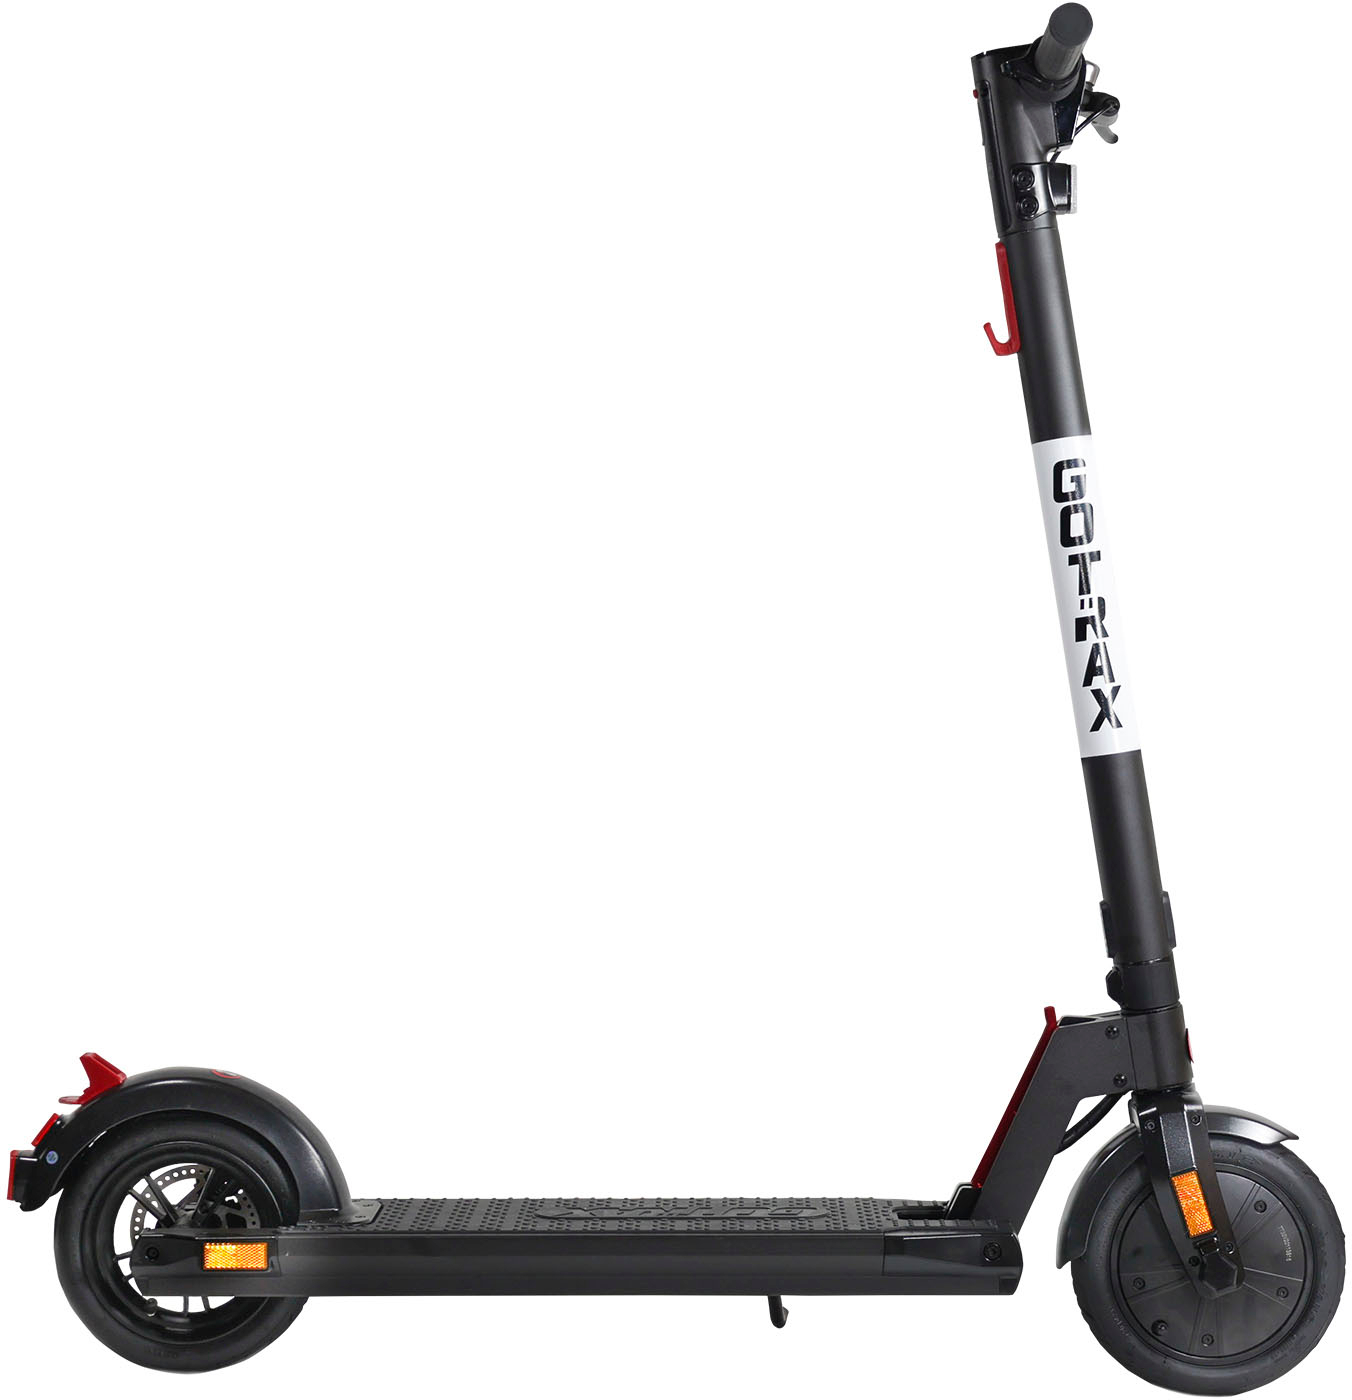 Angle View: GoTrax - Xr Elite Commuting Electric Scooter w/19mi Max Operating Range & 15.5 Max Speed - Black